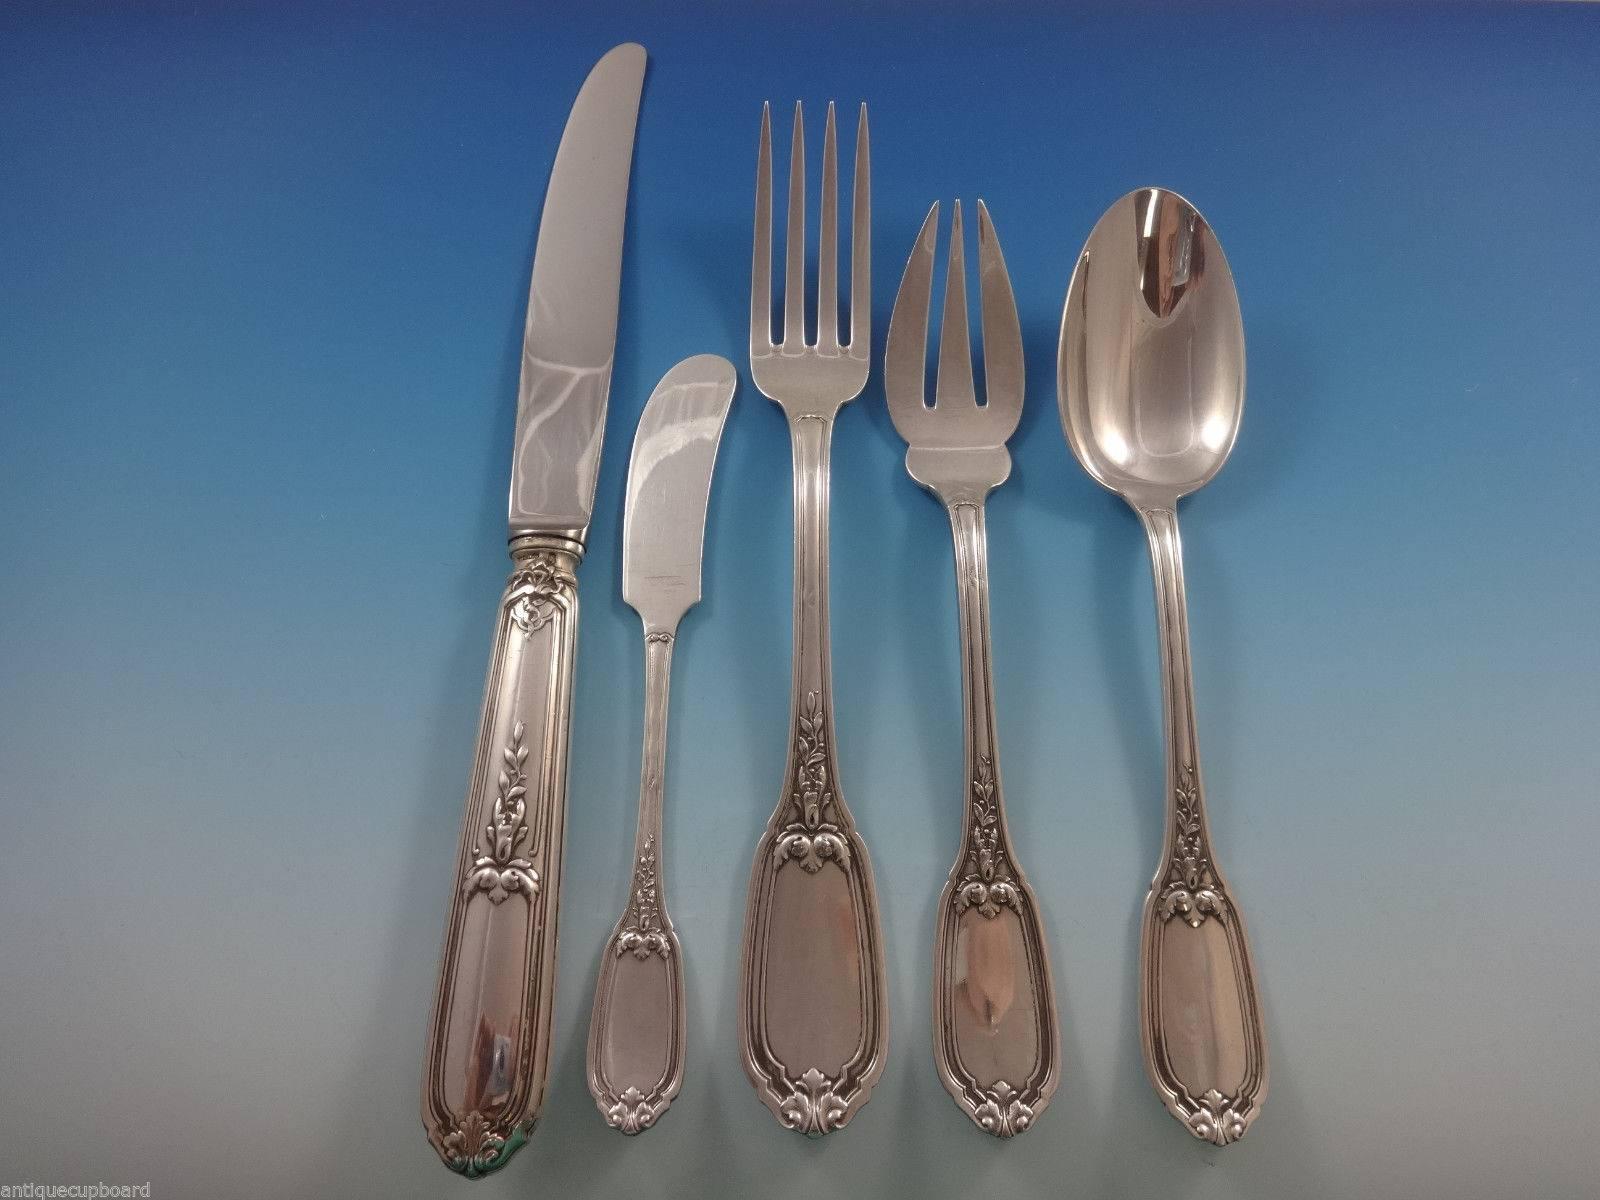 Beautiful French export (1840-1973) sterling silver flatware set of 30 pieces. This set includes:

Six dinner knives, 10